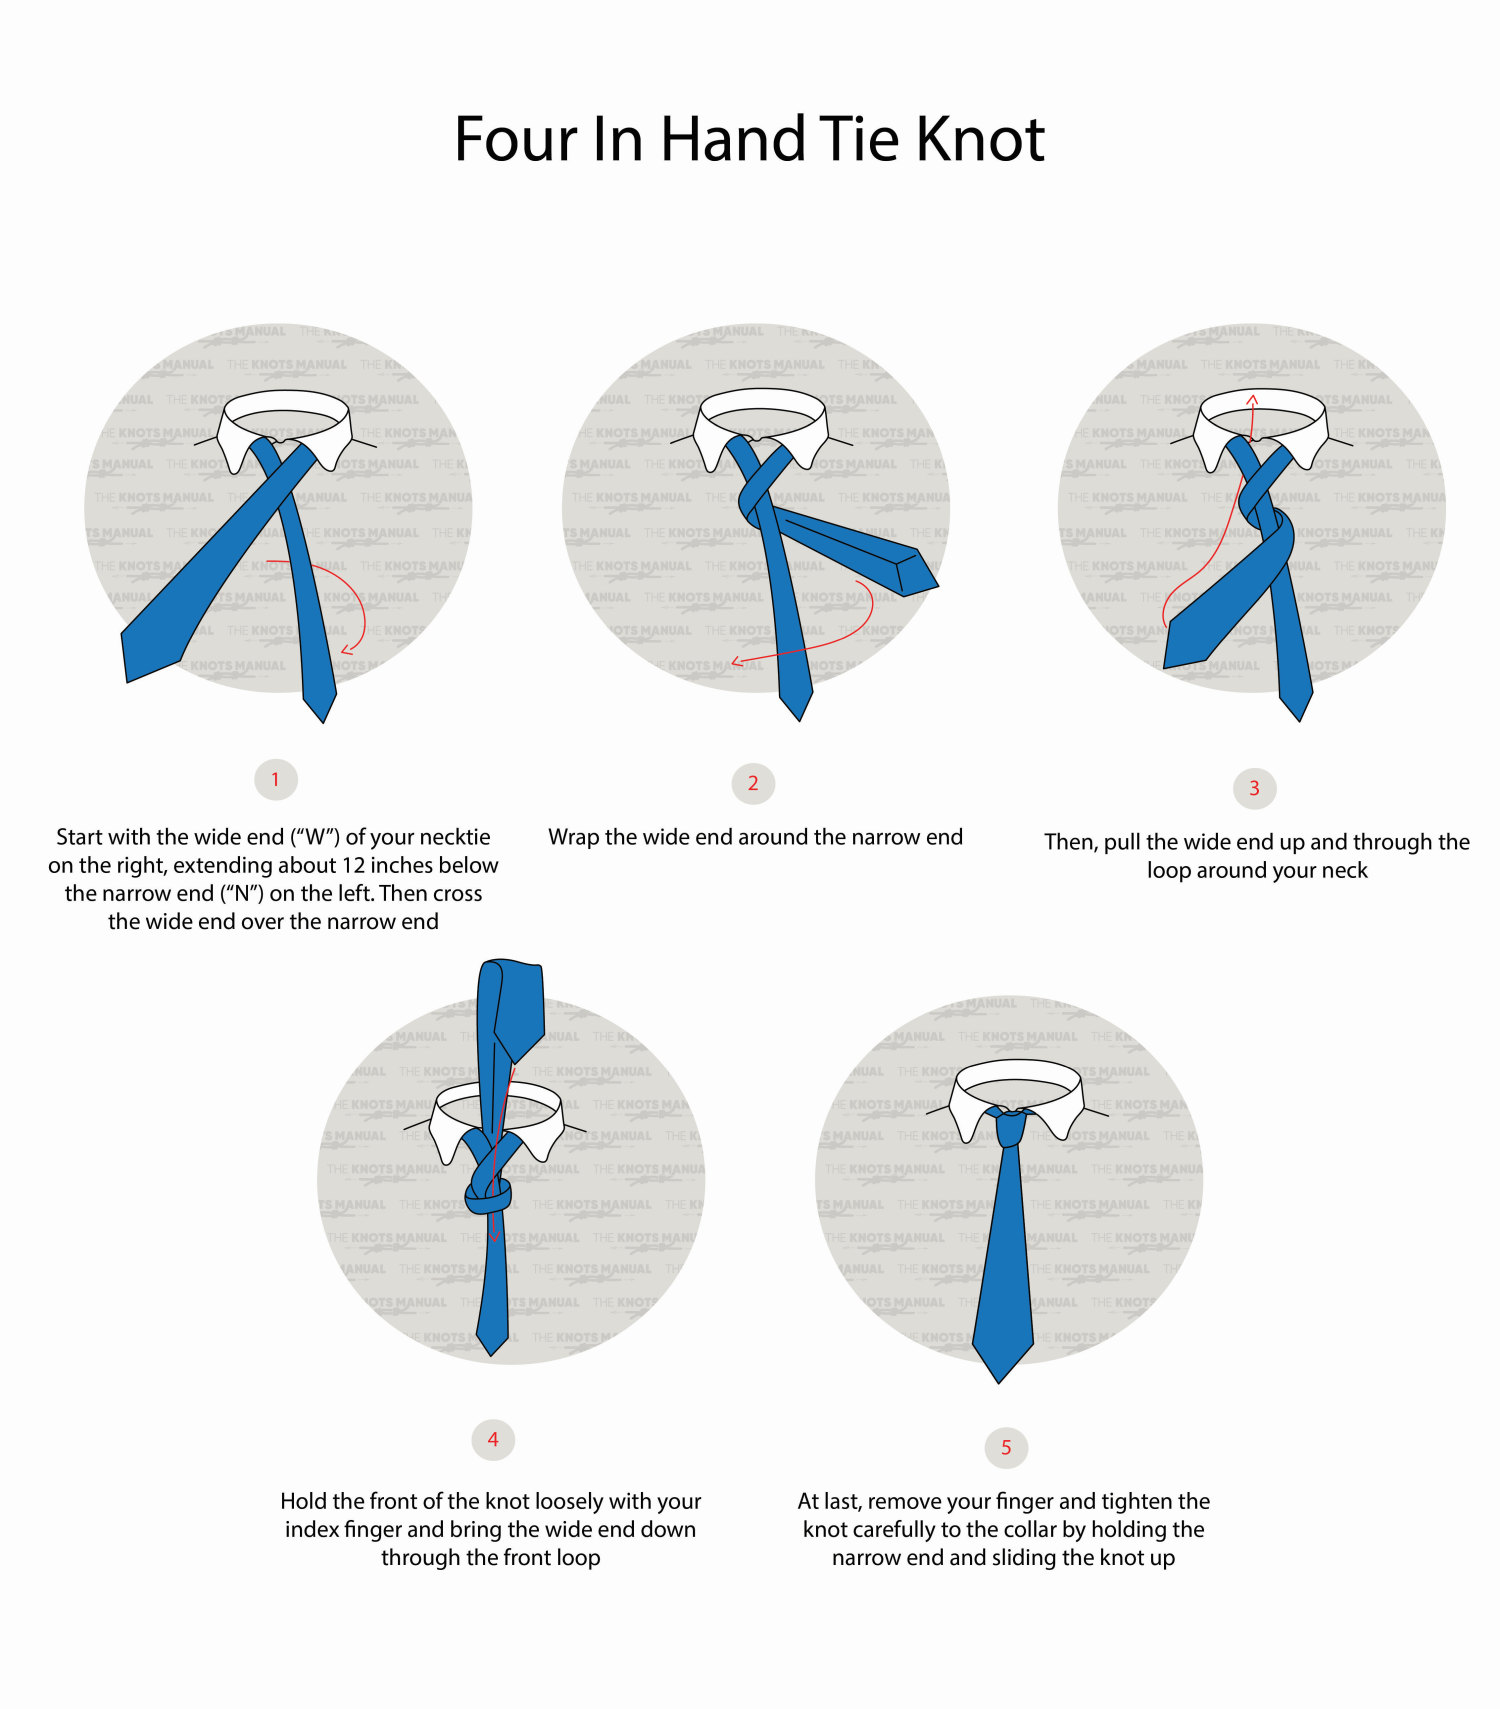 Four in hand knot step by step